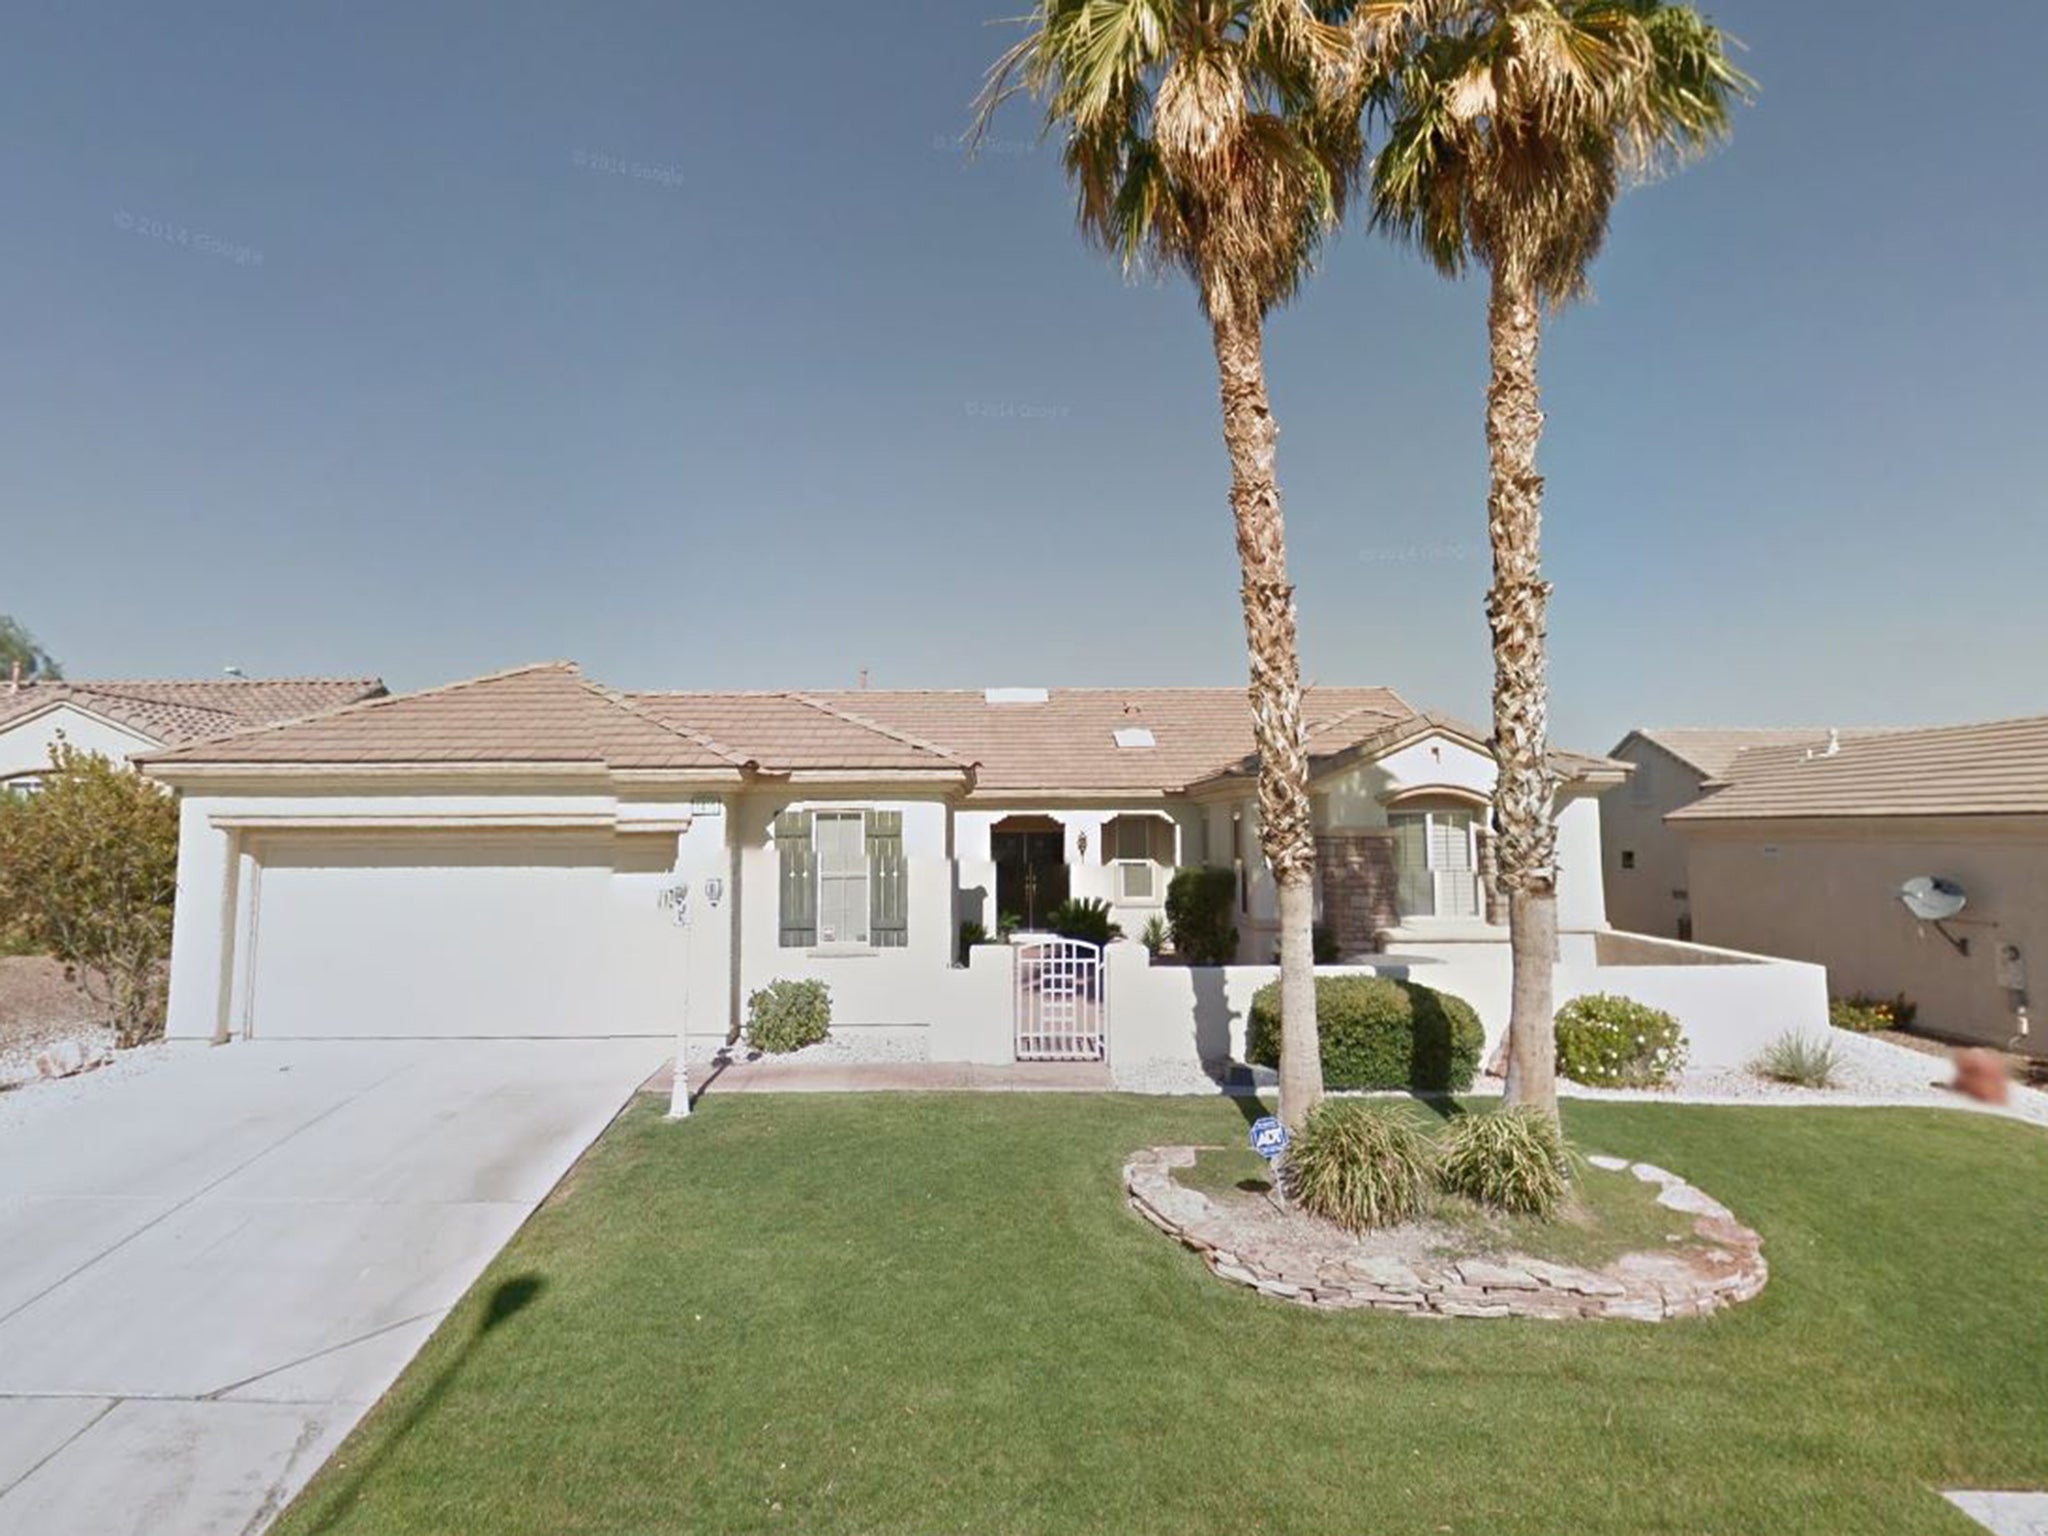 Former priest John Capparelli, 70, was found shot dead in his home in Henderson, Nevada